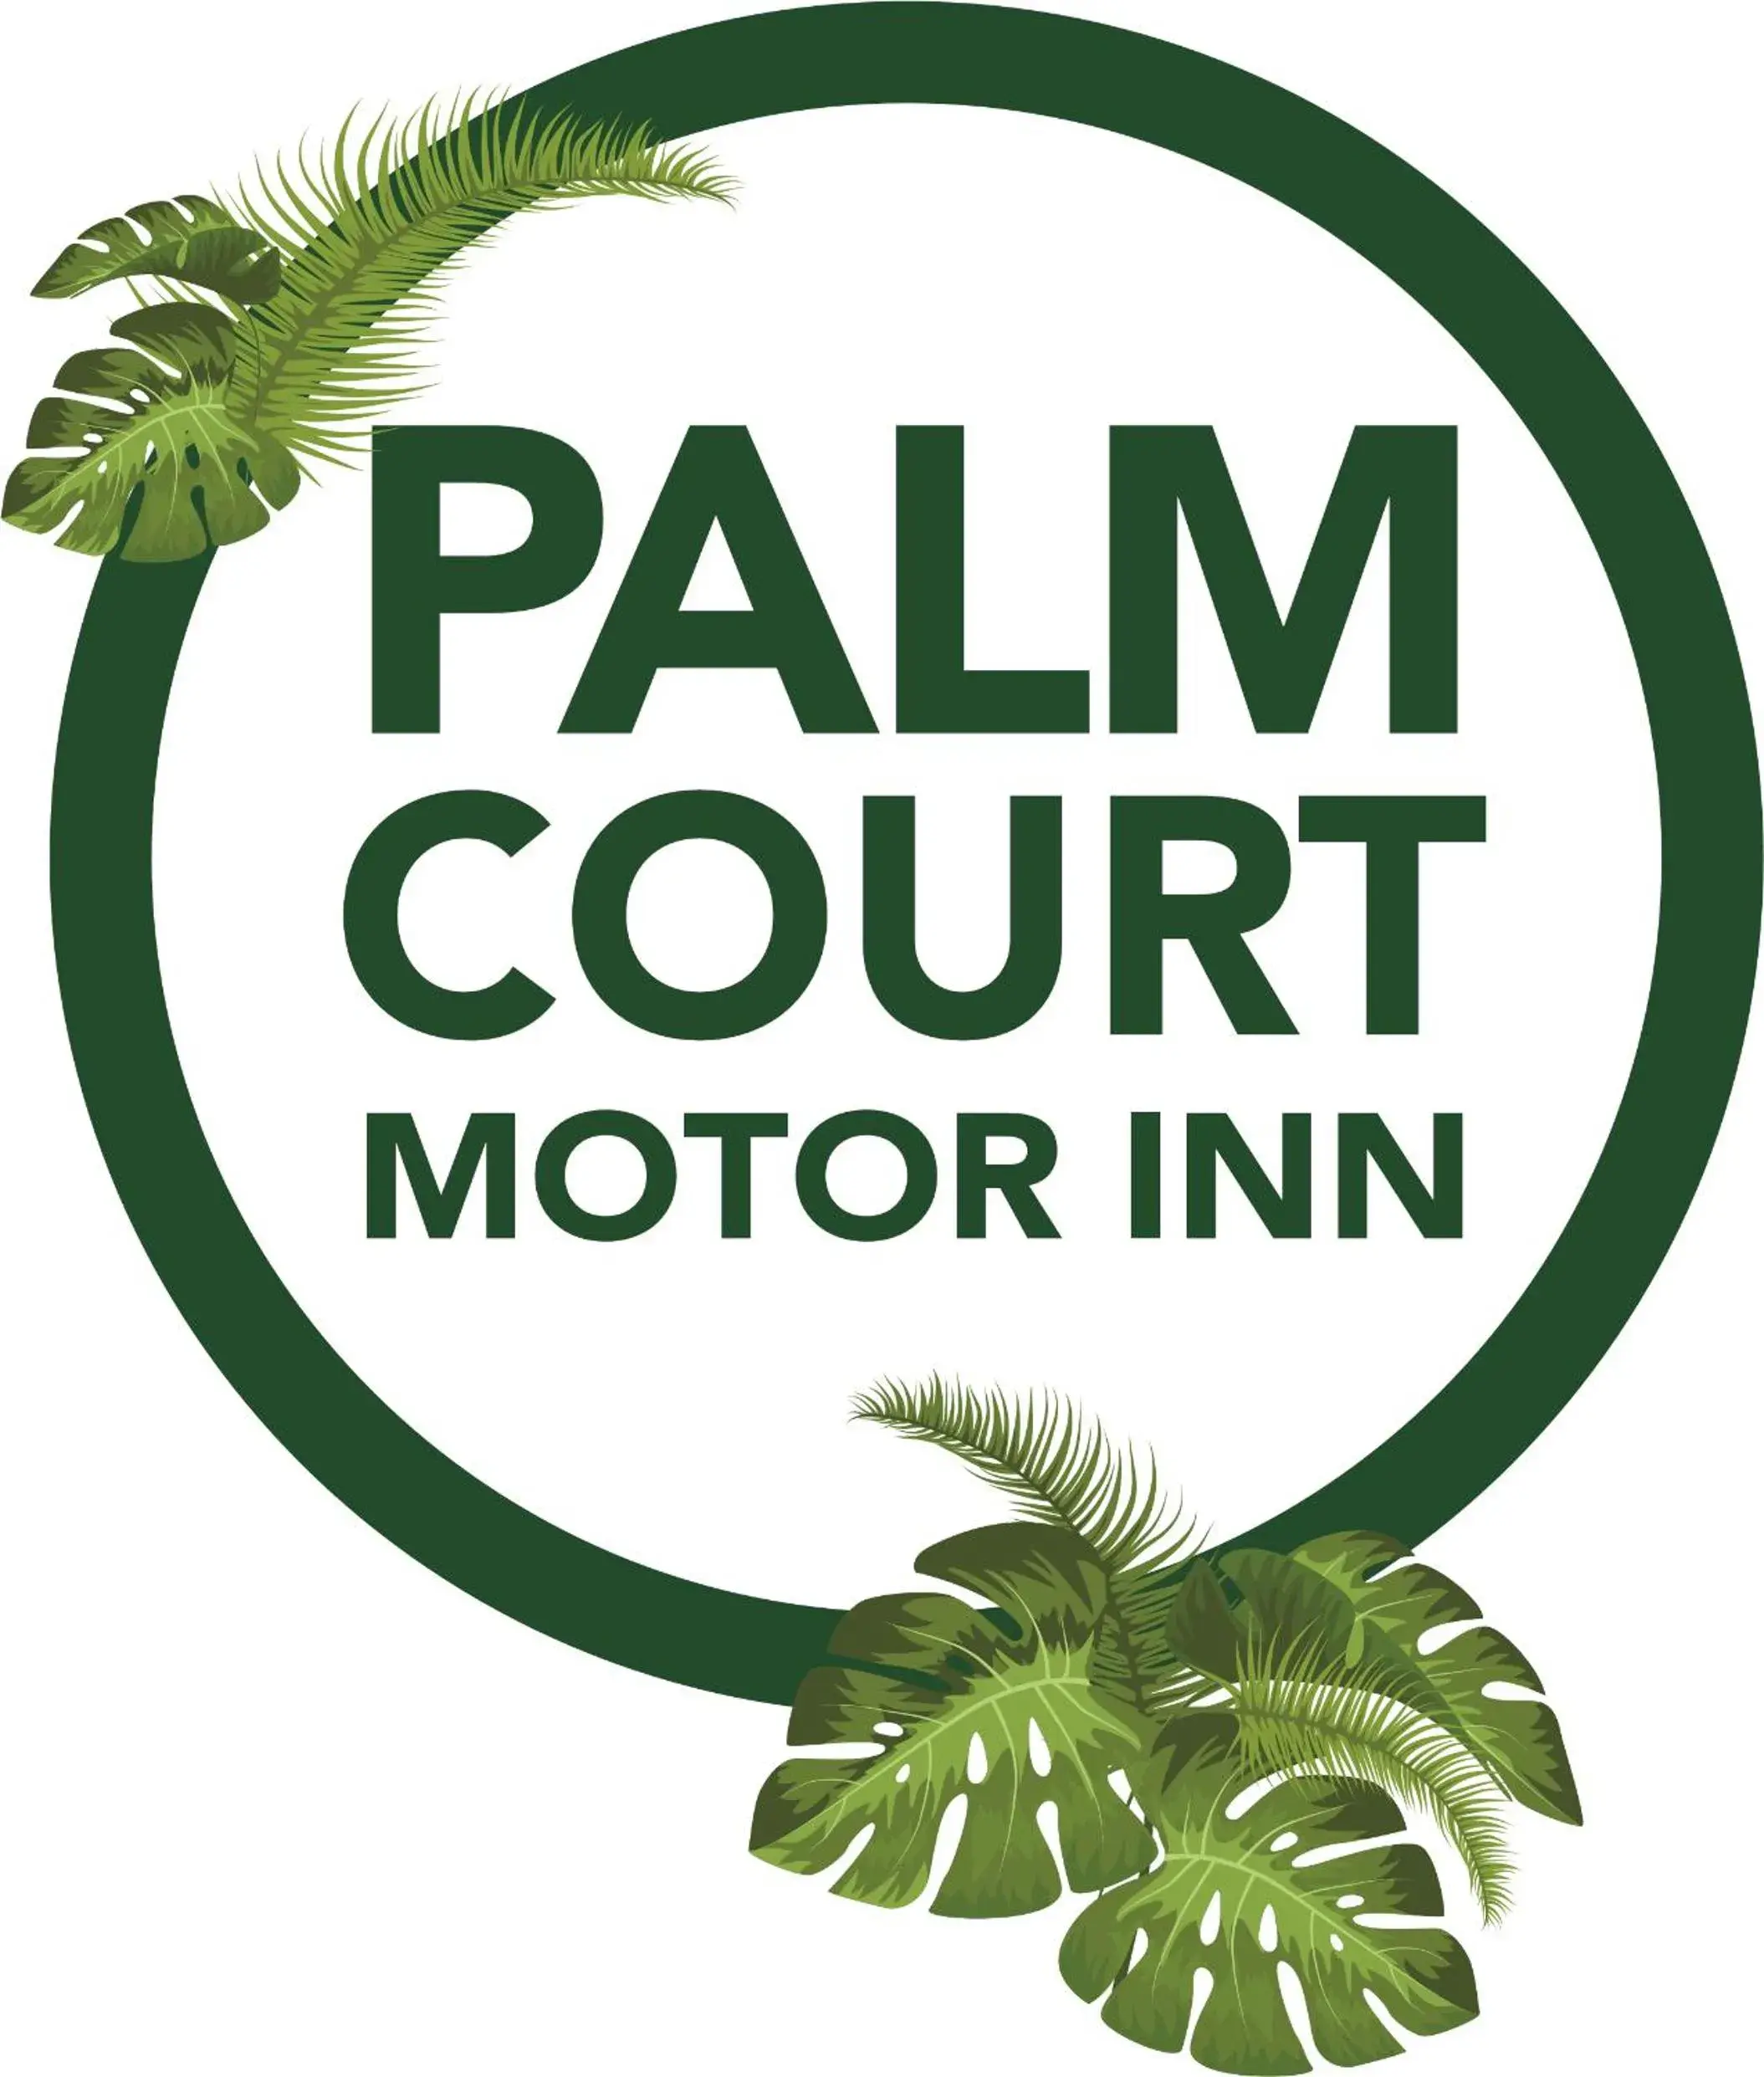 Property logo or sign in Palm Court Motor Inn